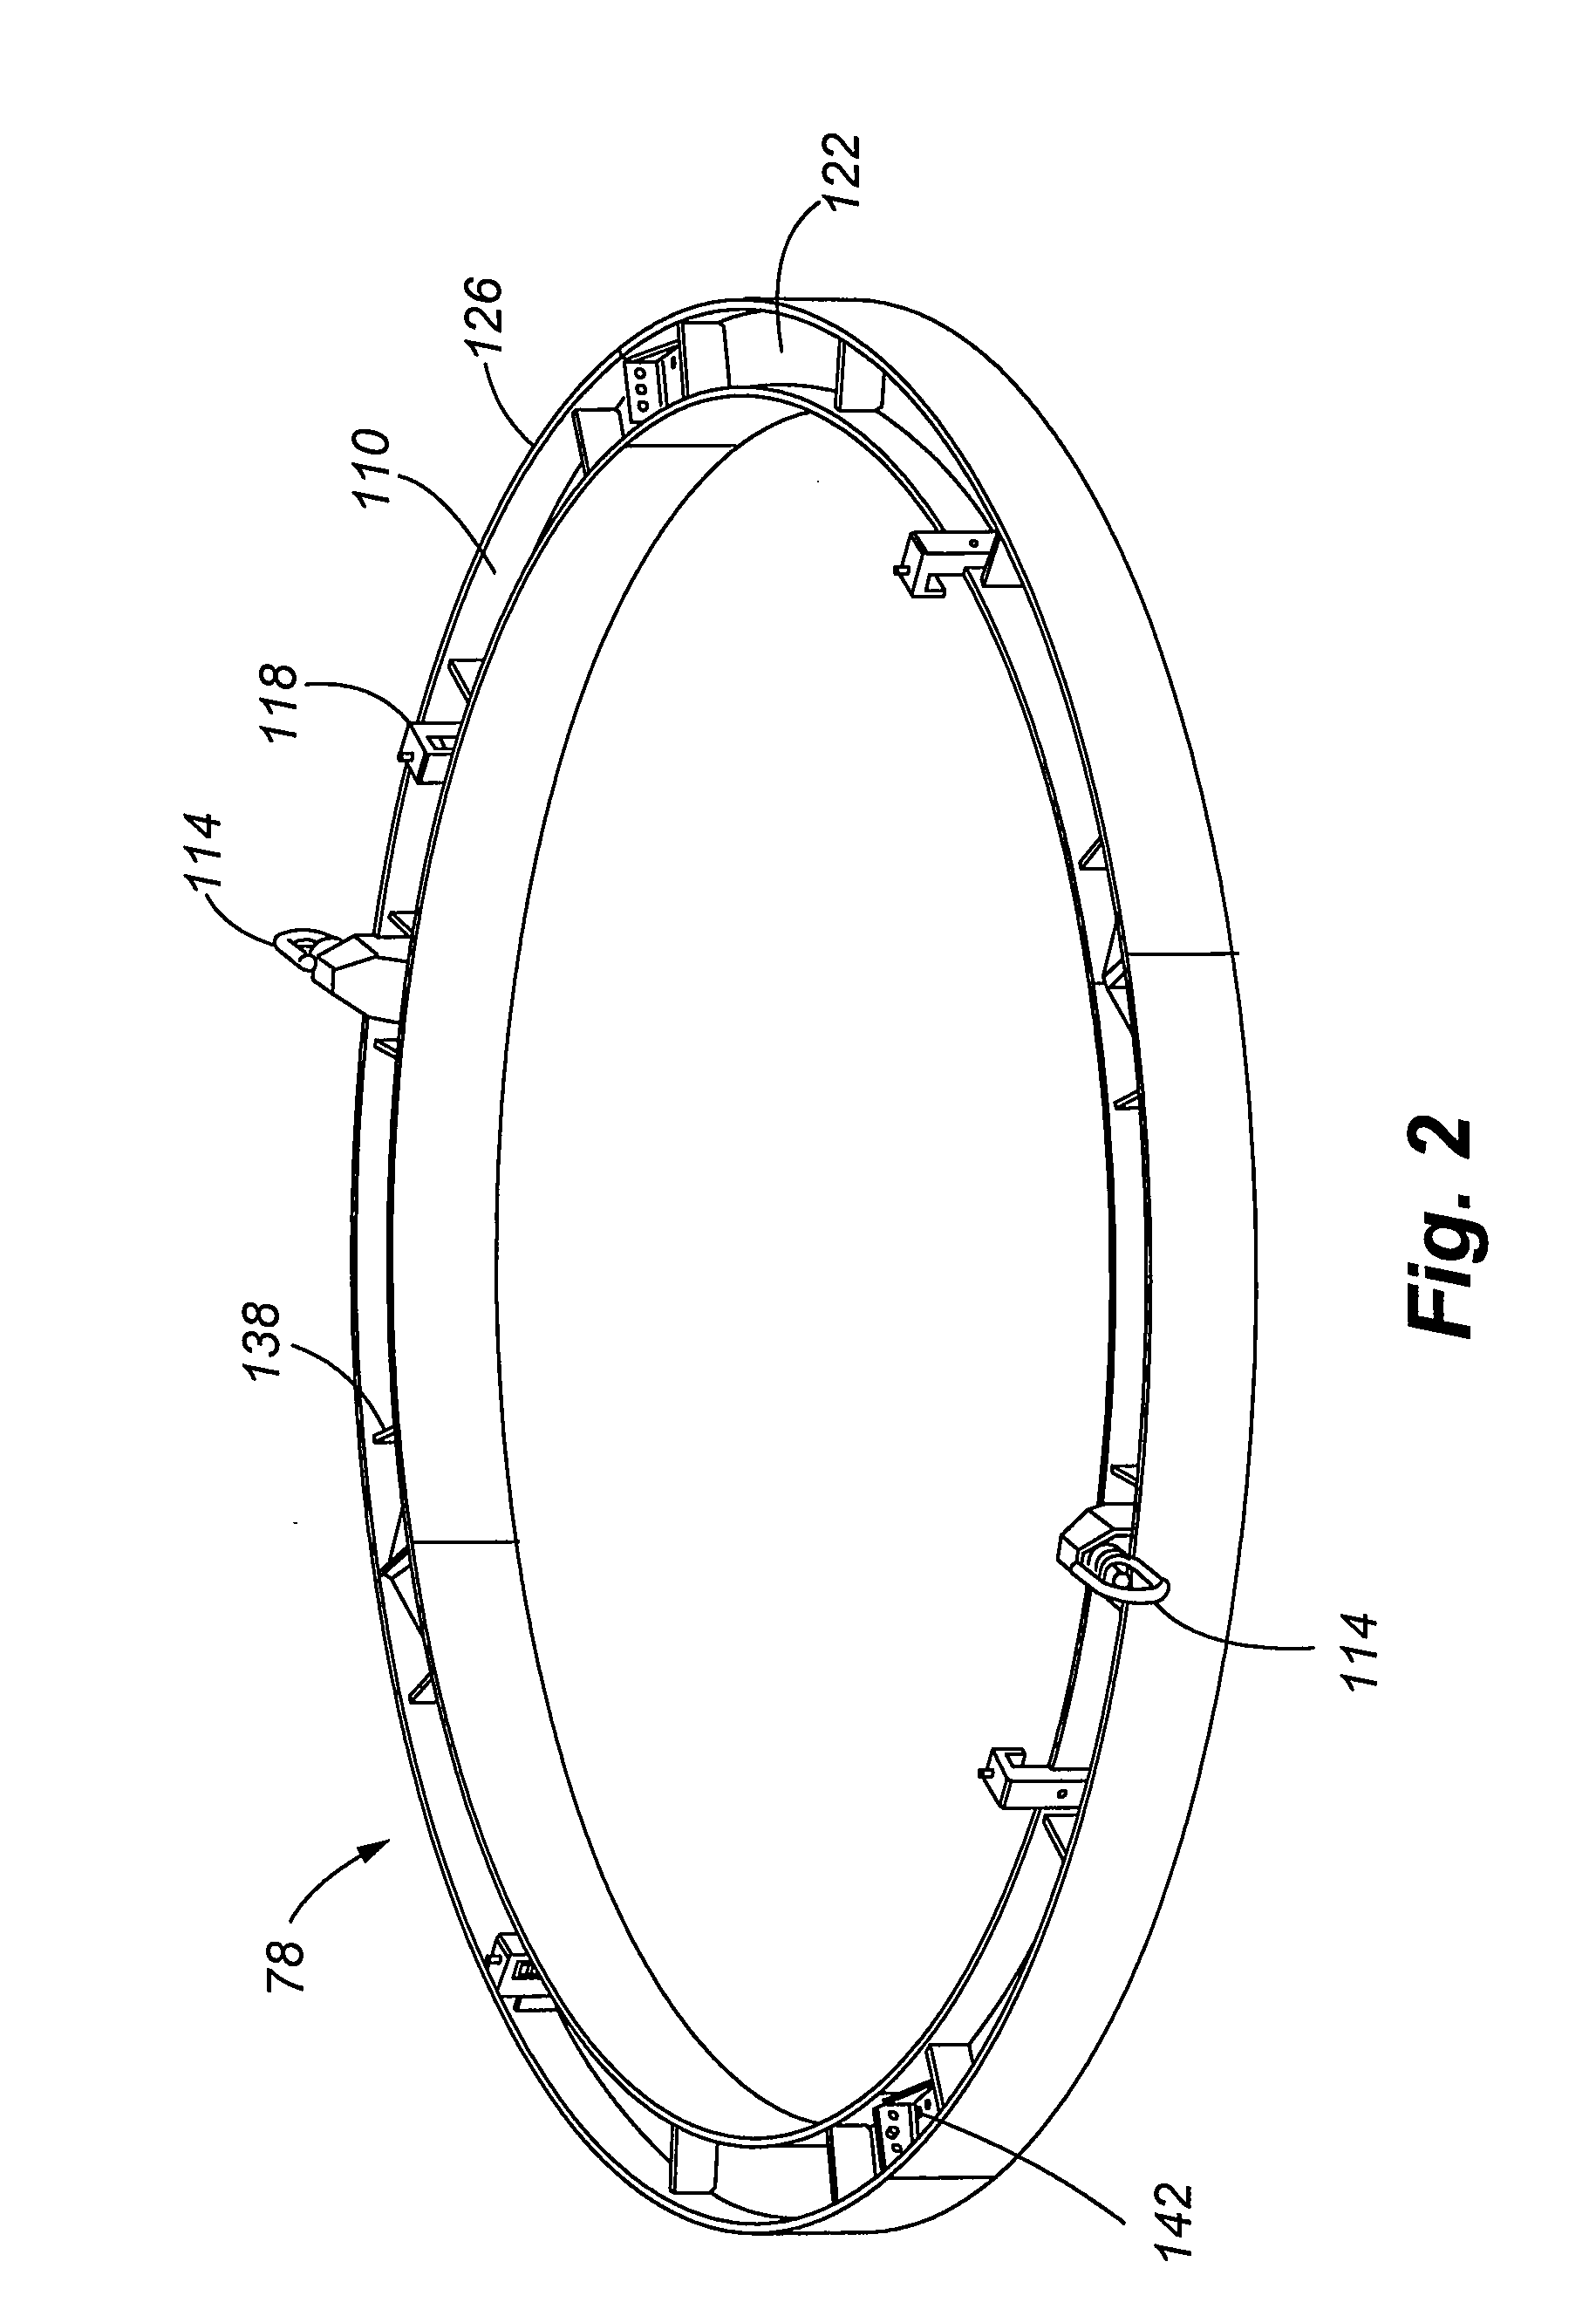 Friction welding apparatus, system and method